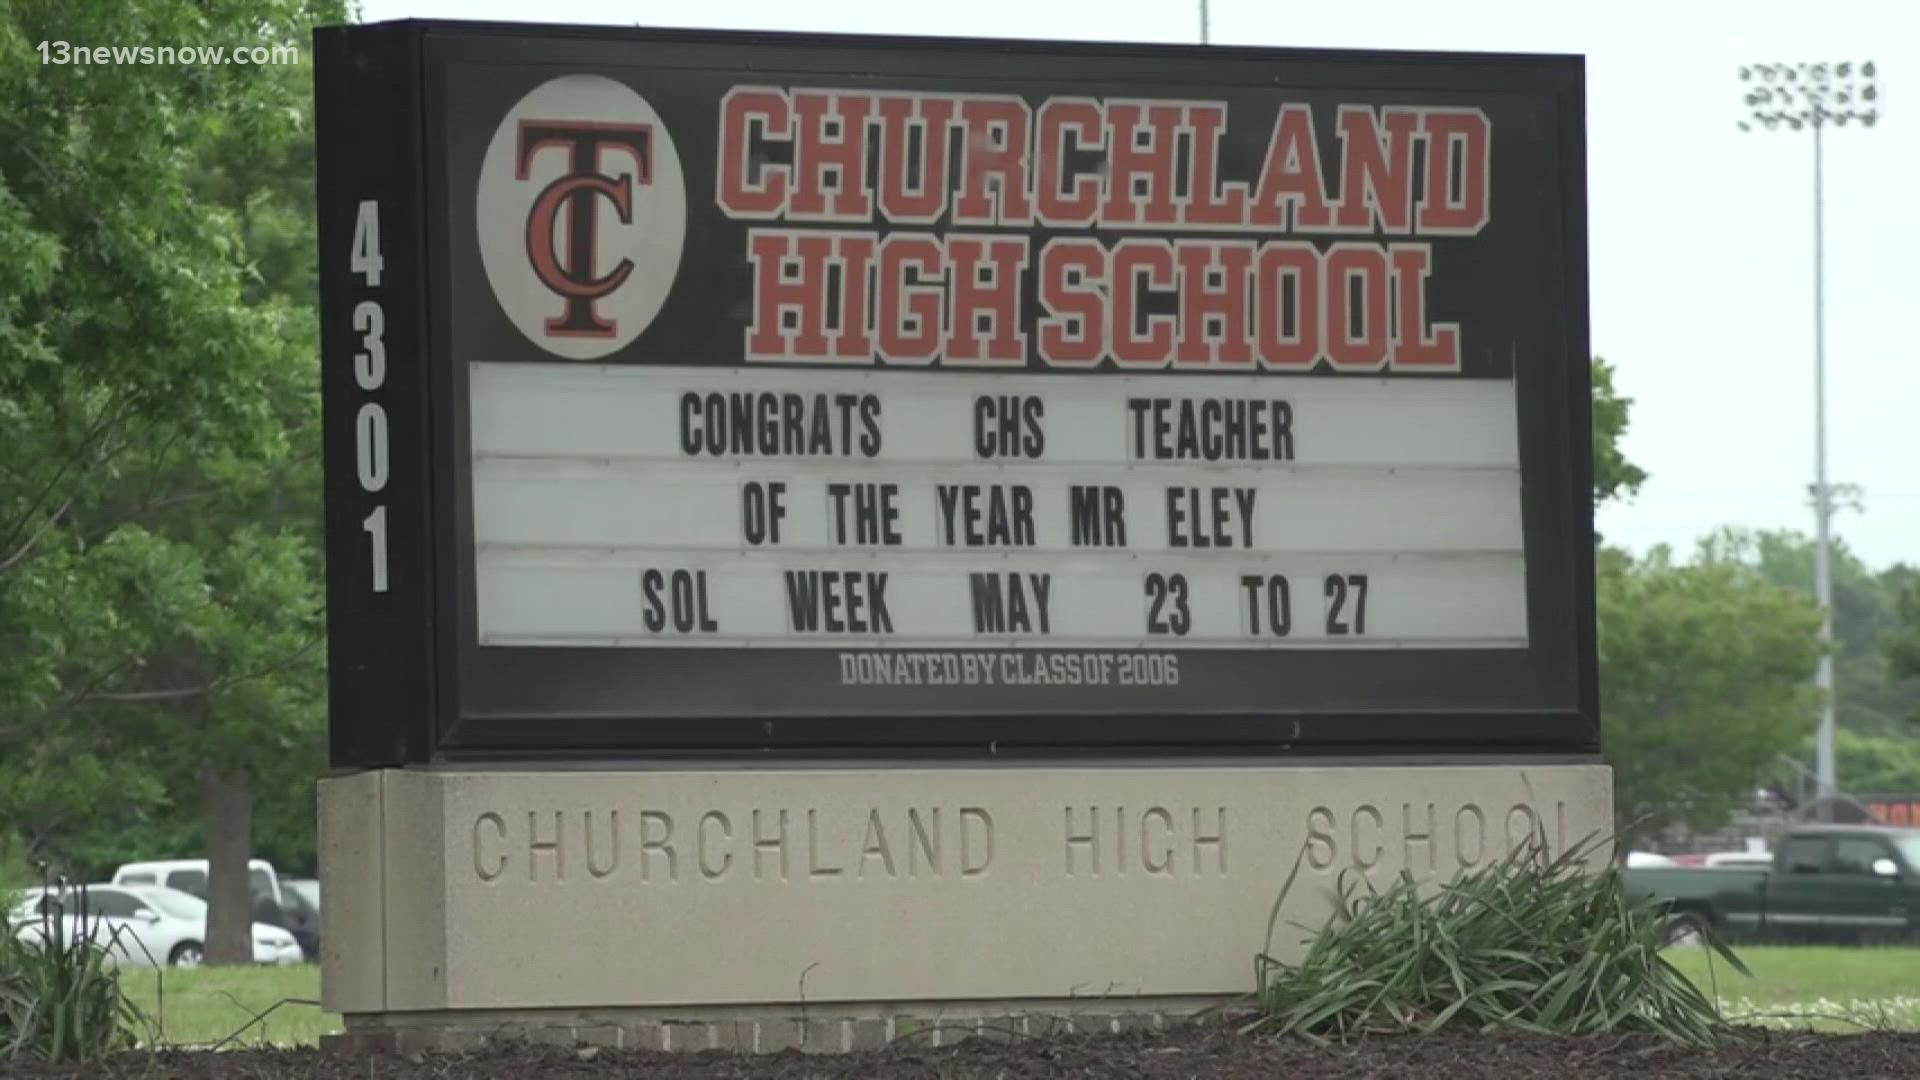 After several staff members tested positive for COVID-19 in a 24-hour period, Portsmouth Public Schools said Churchland High would move to virtual learning.